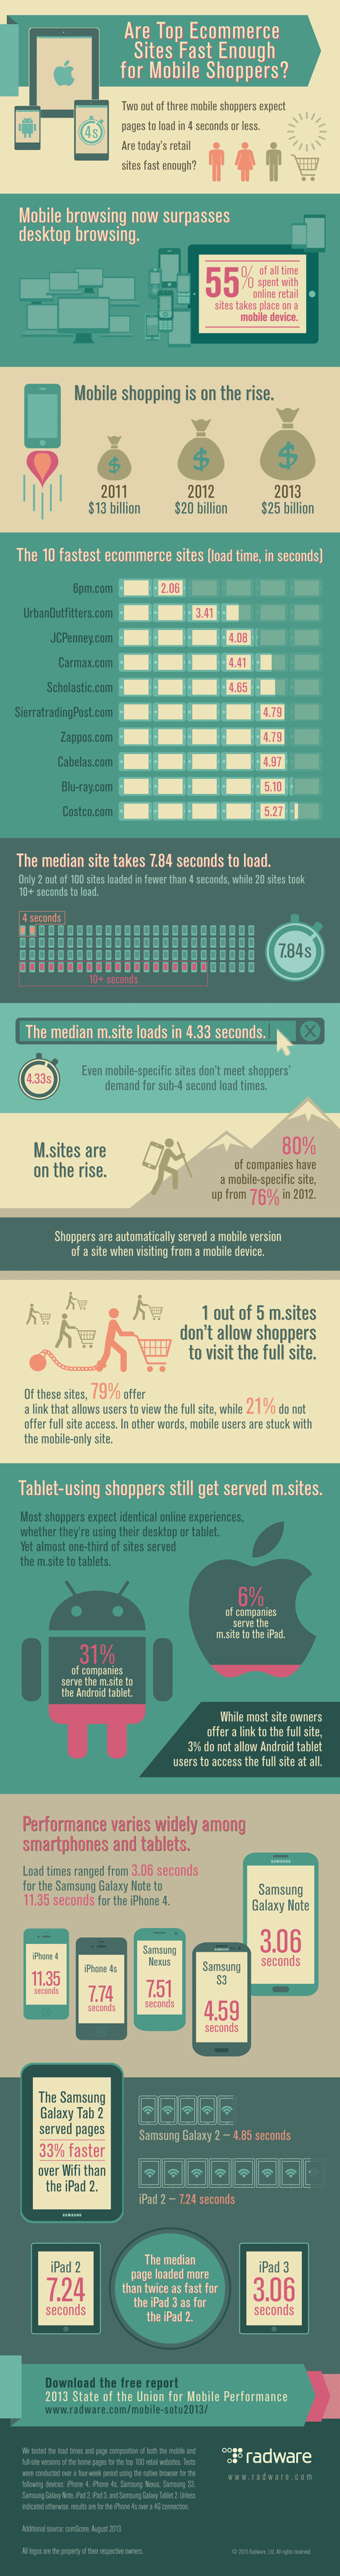 INFOGRAPHIC: Mobile Ecommerce Web Performance